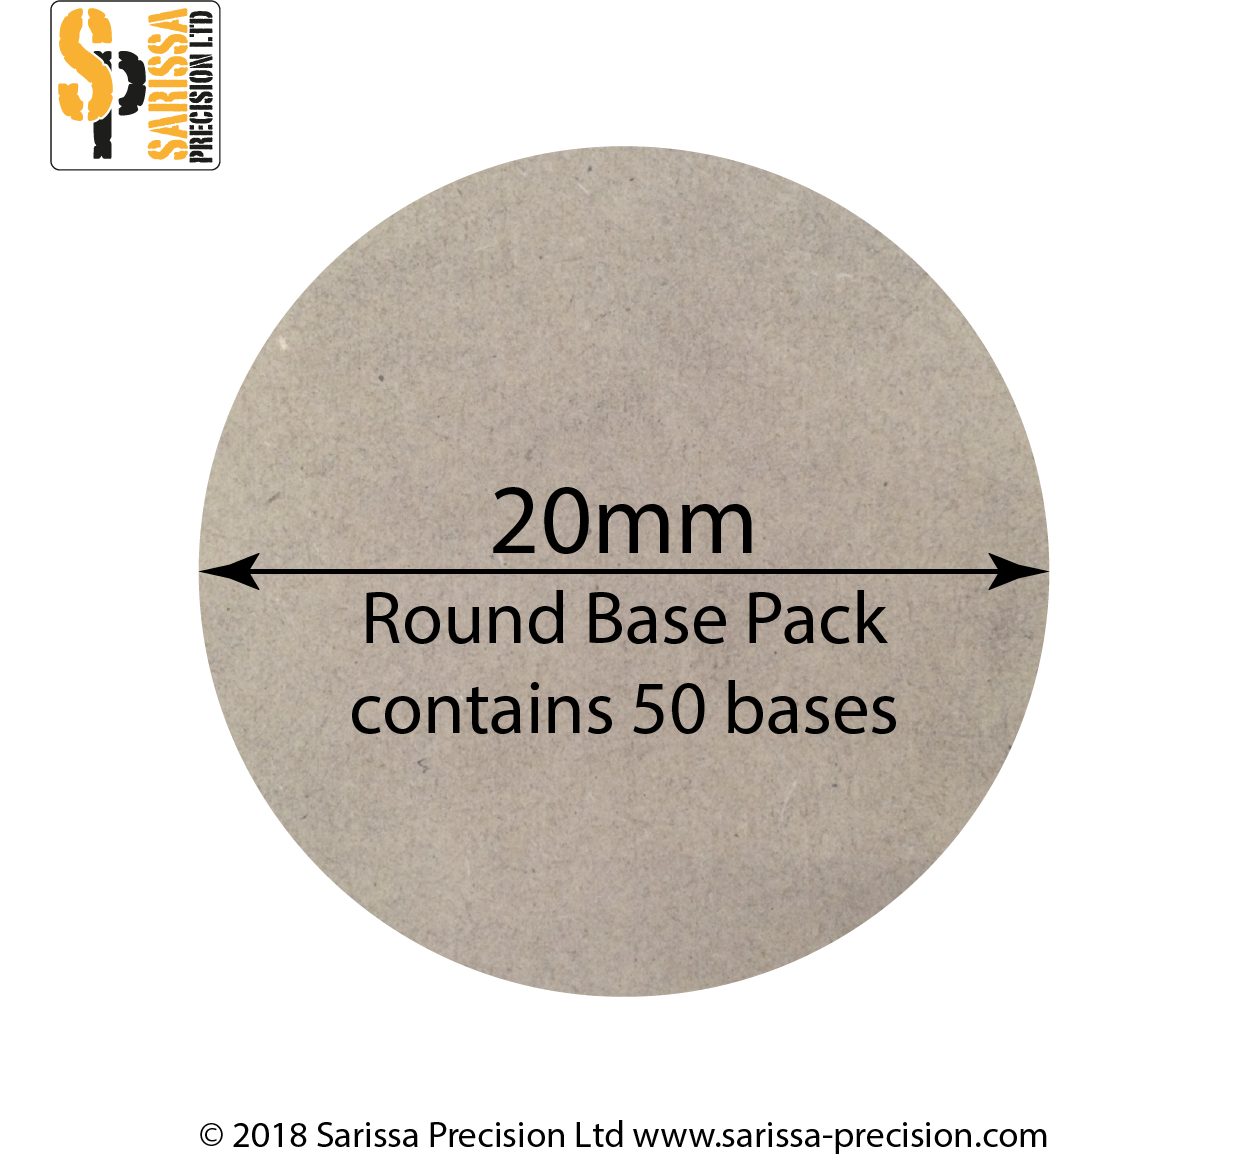 20mm Round Base Pack